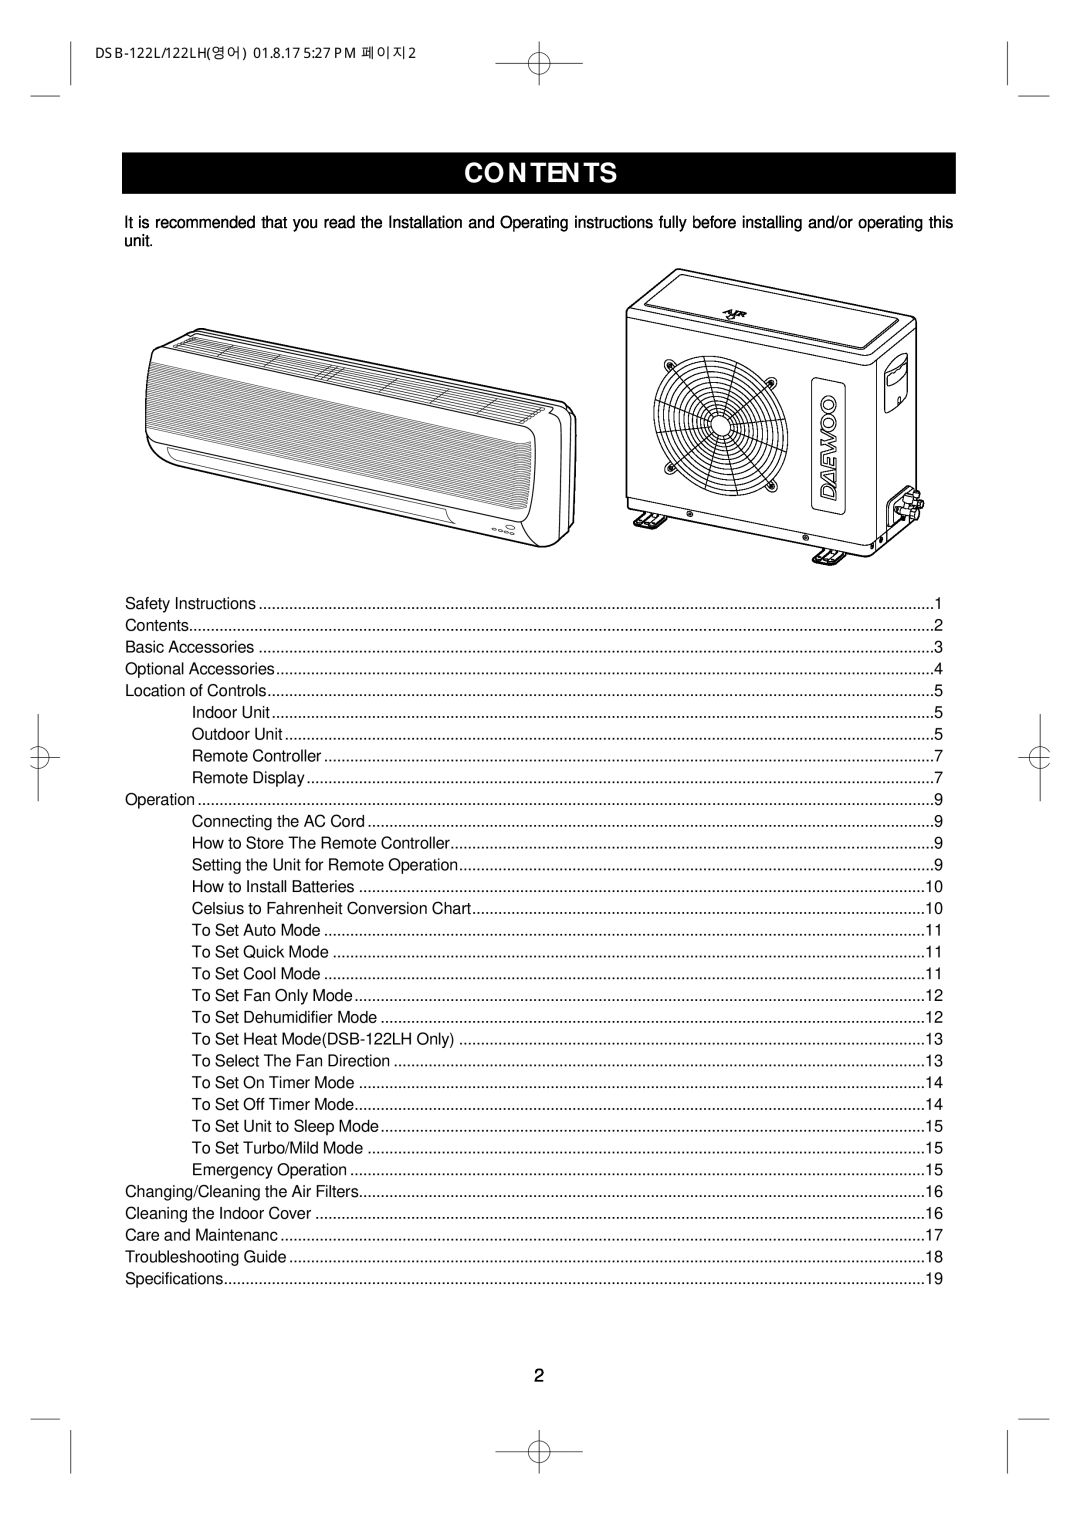 Daewoo DSB-122LH owner manual Contents 